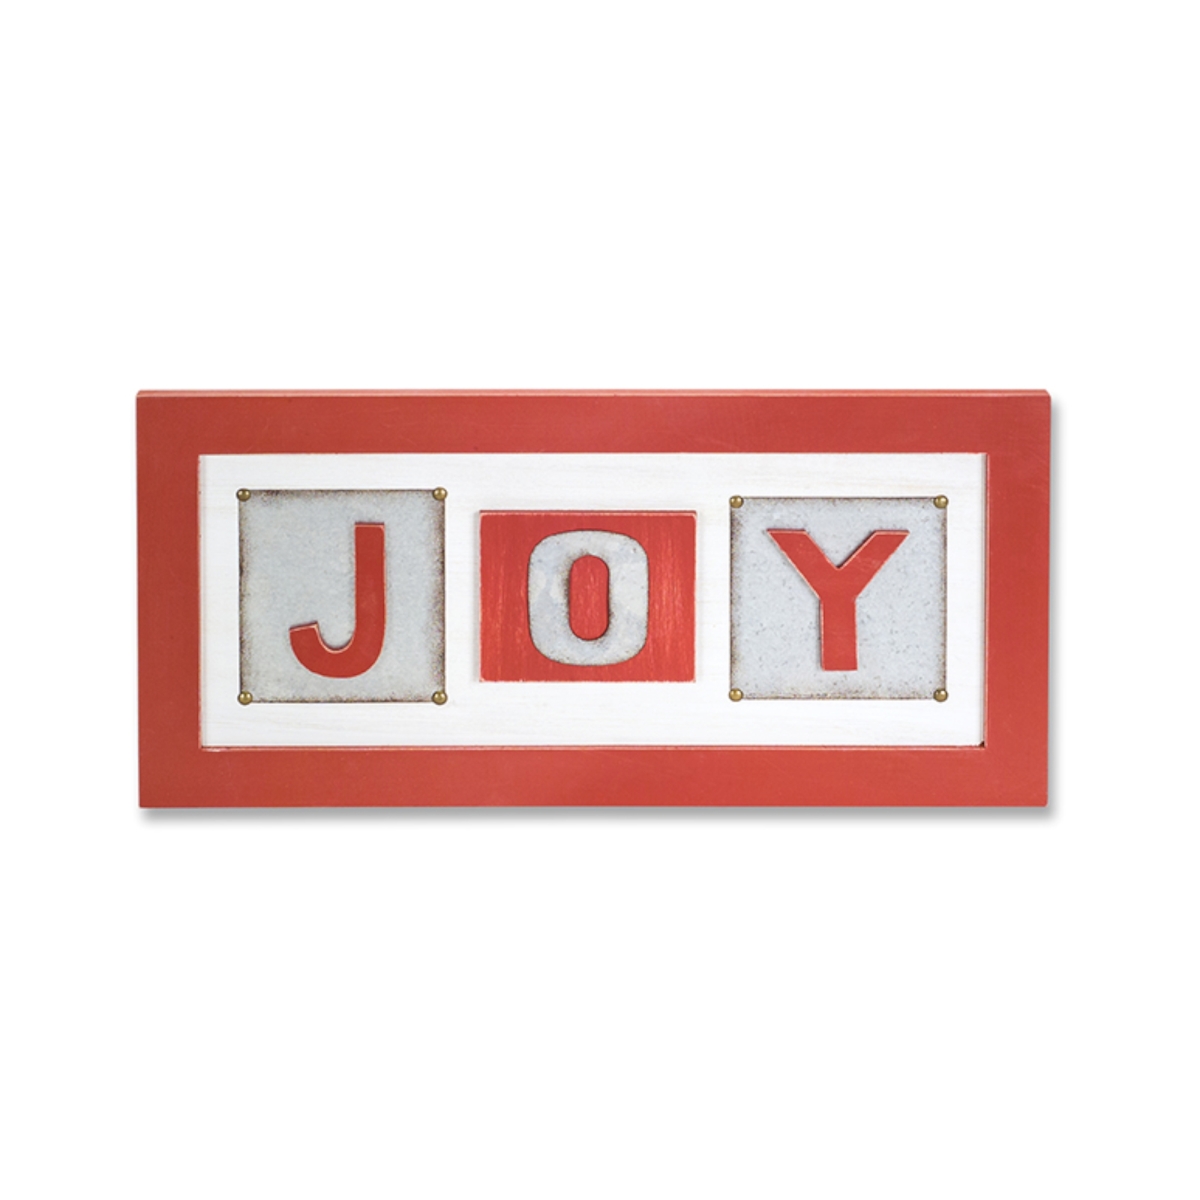 73186ds 10.5 X 21.5 In. Mdf Joy Frame, Red & White - Set Of 2